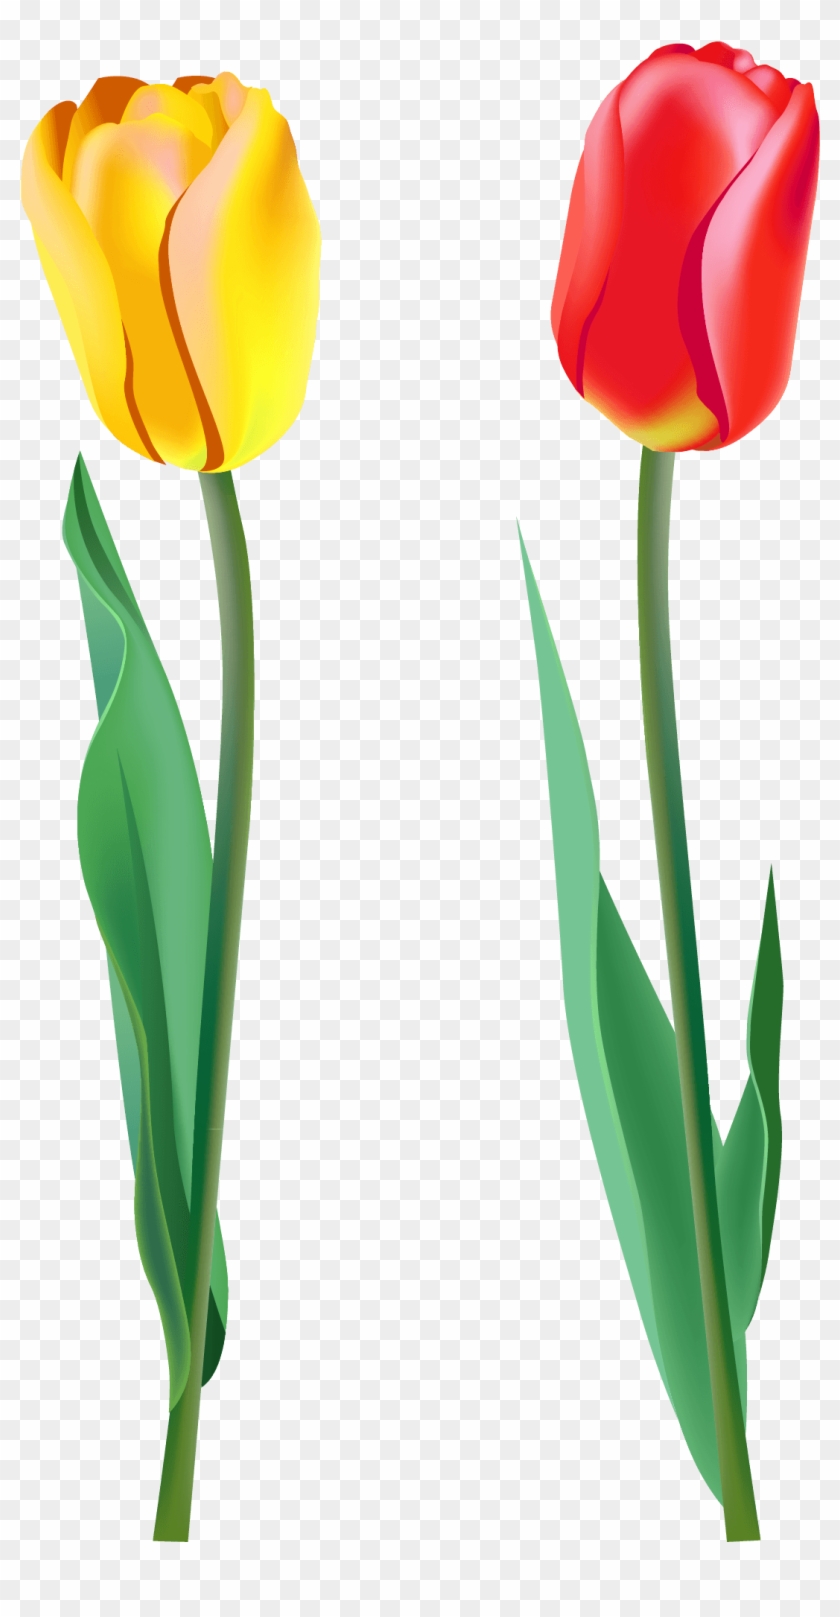 Spring Tulips Clip Art - Tulips Png #1633110